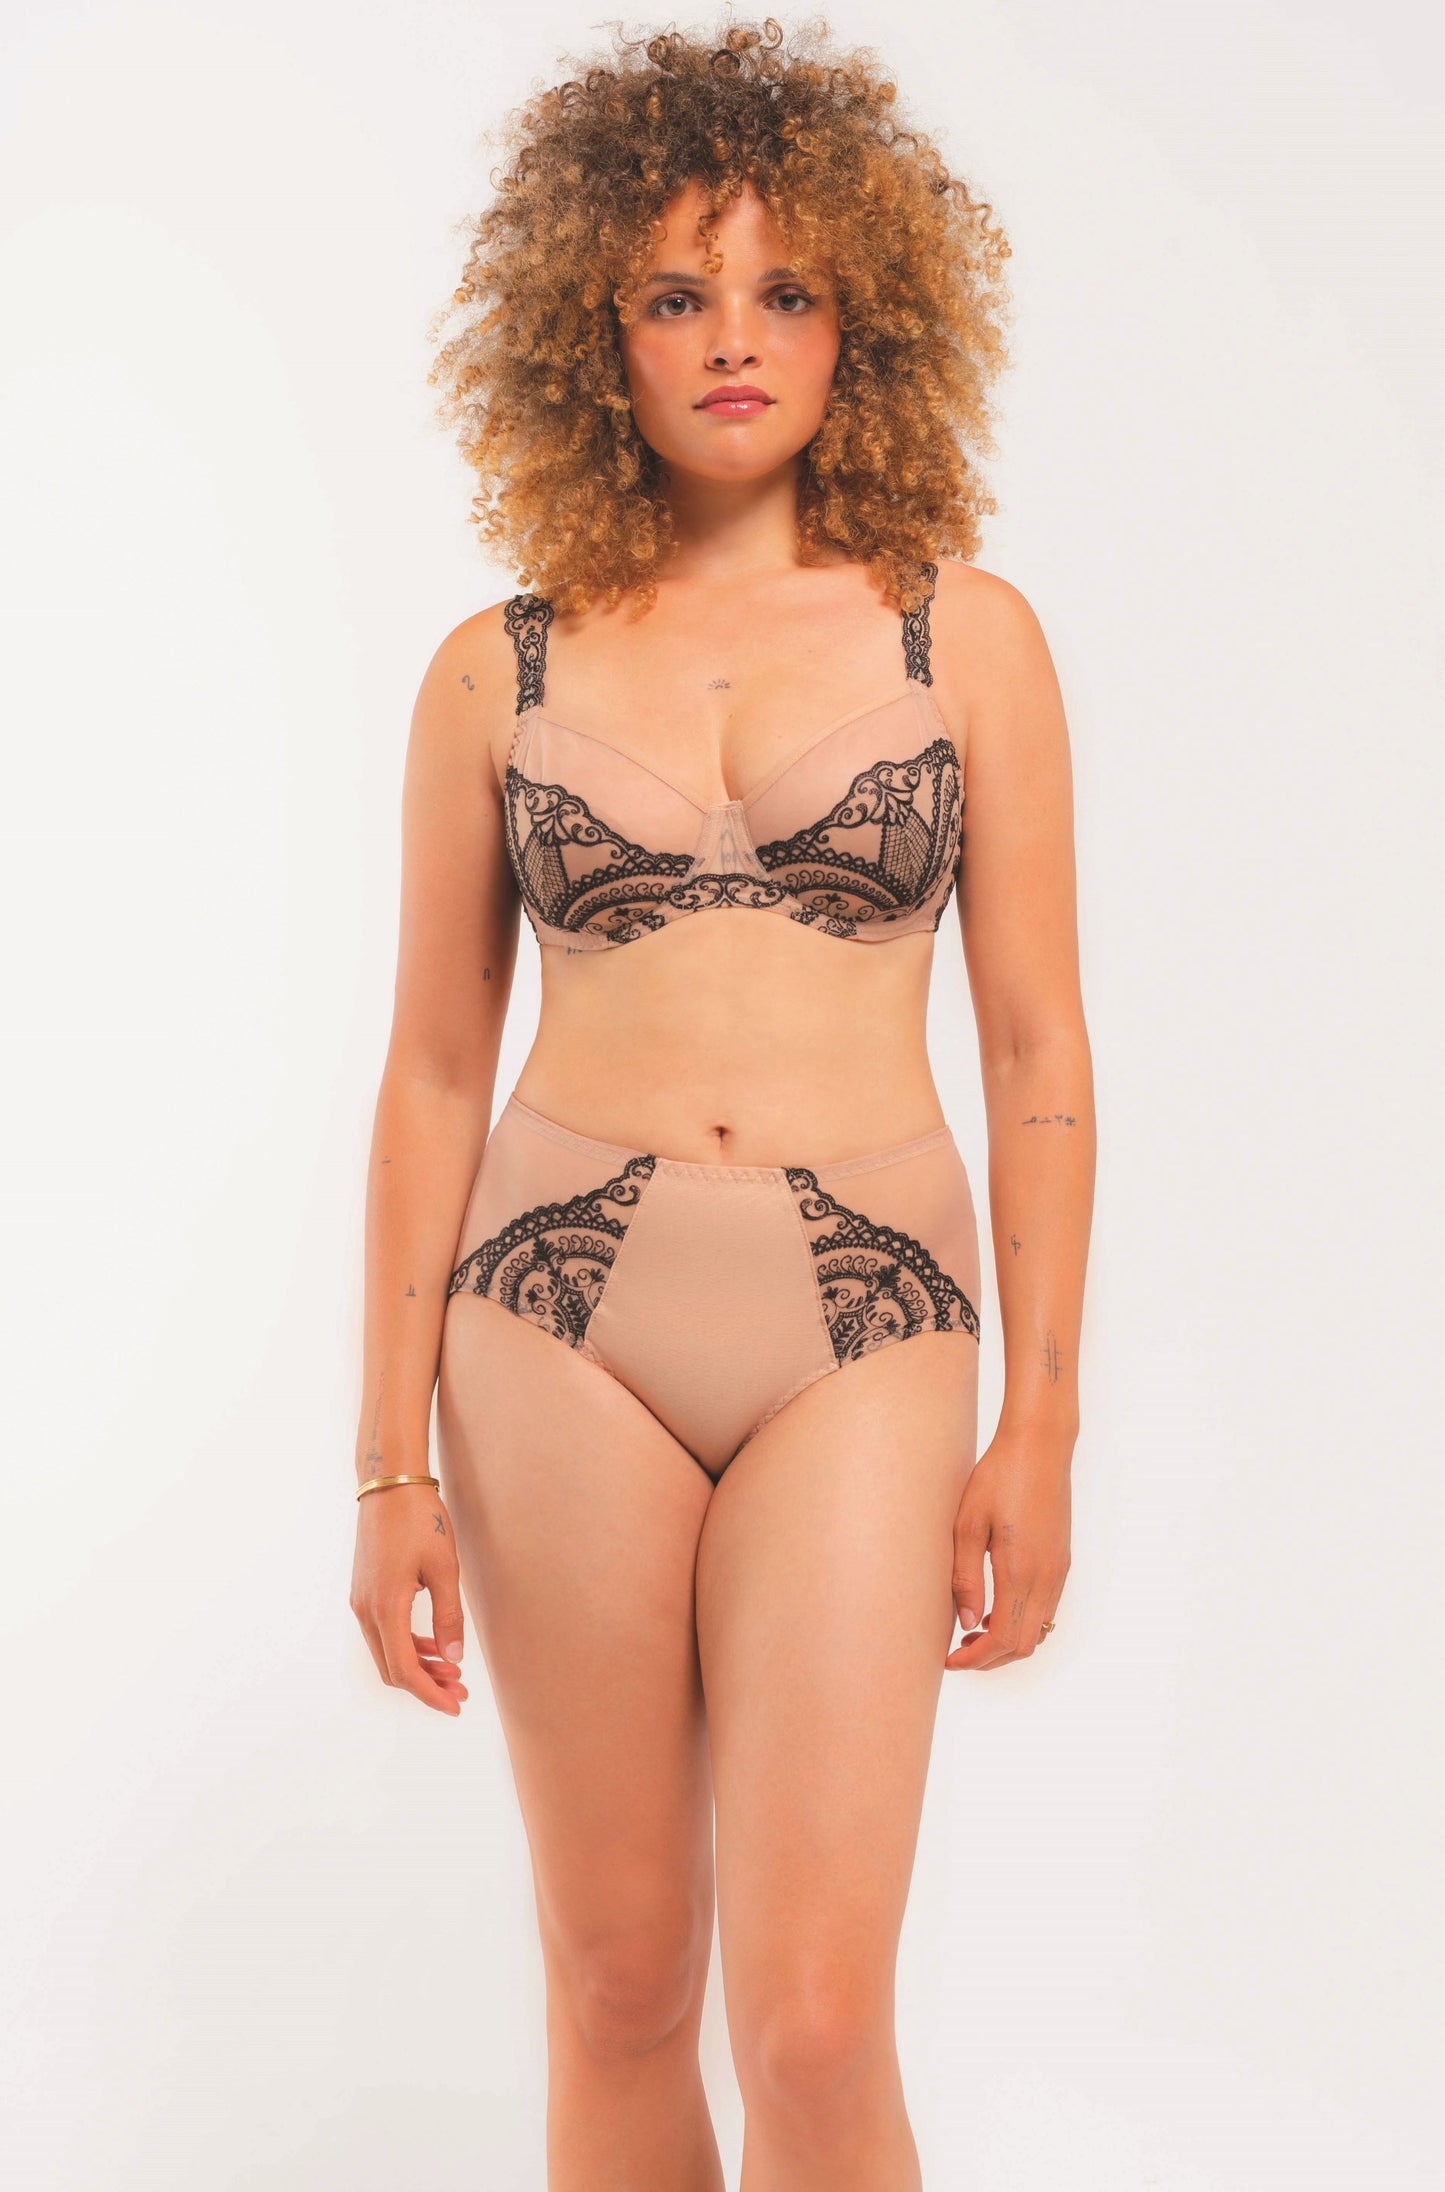 Sophisticated and luxuriously embroidered full brief panties and bra from the Kant line by Louisa Bracq from France at DiModa Lingerie Toronto.